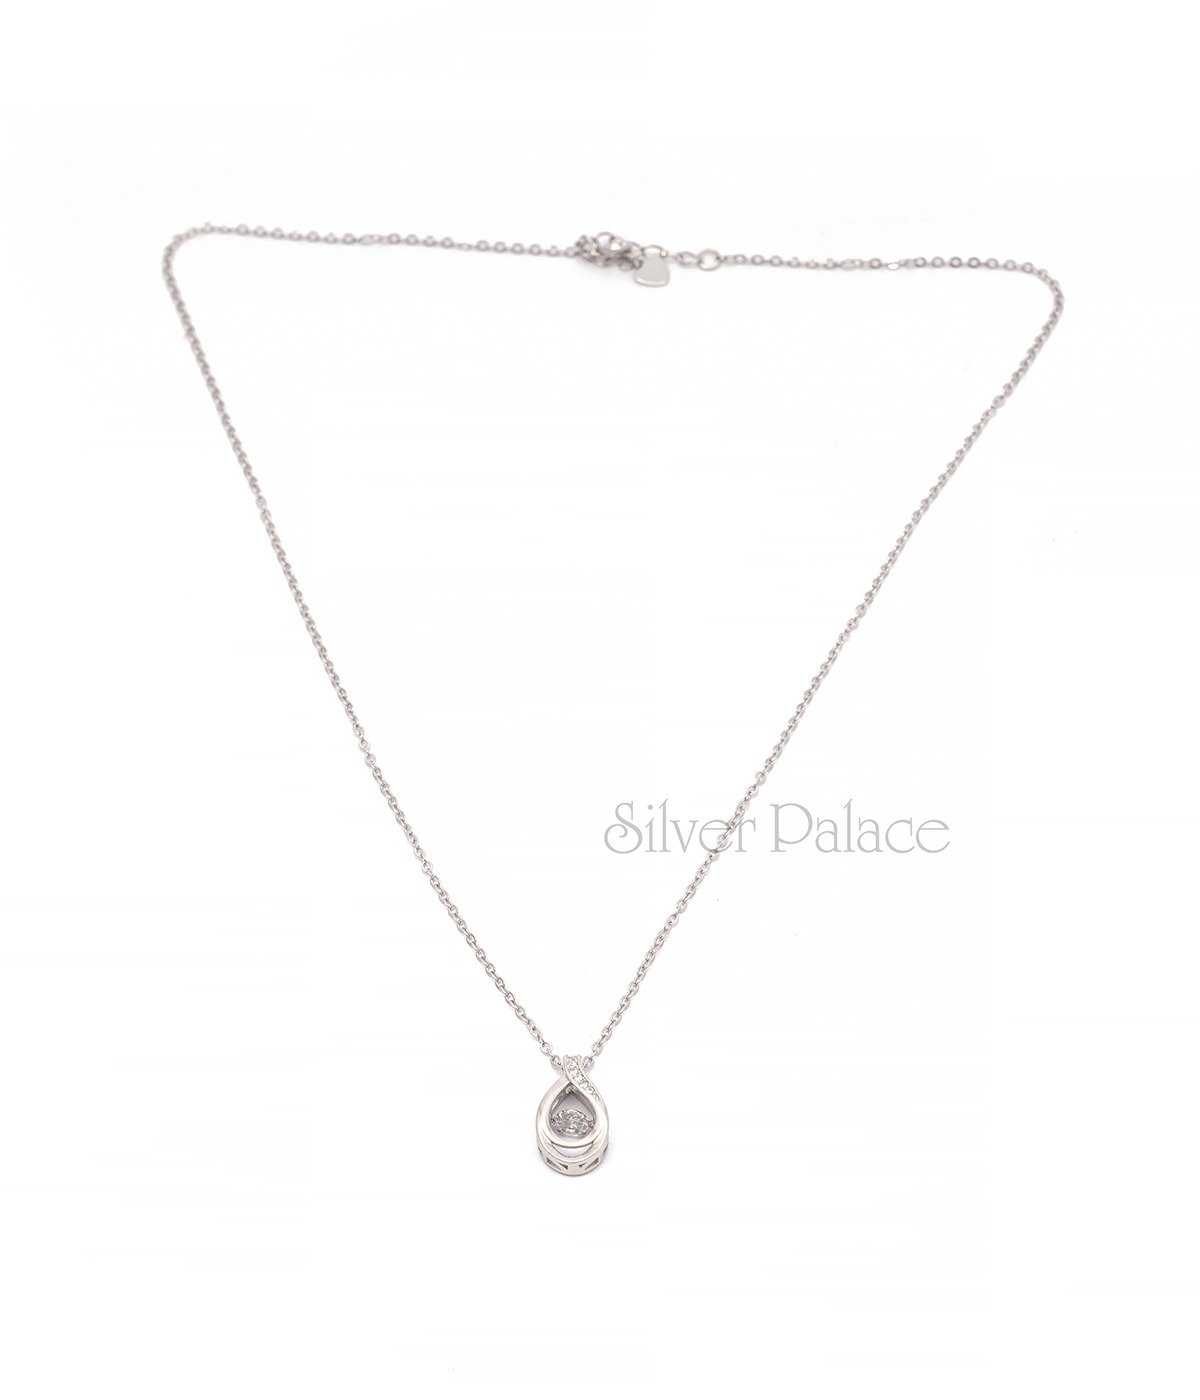 92.5 STERLING SILVER TINY DROP SHAPE WITH STONE PENDANT AND CHAIN LW